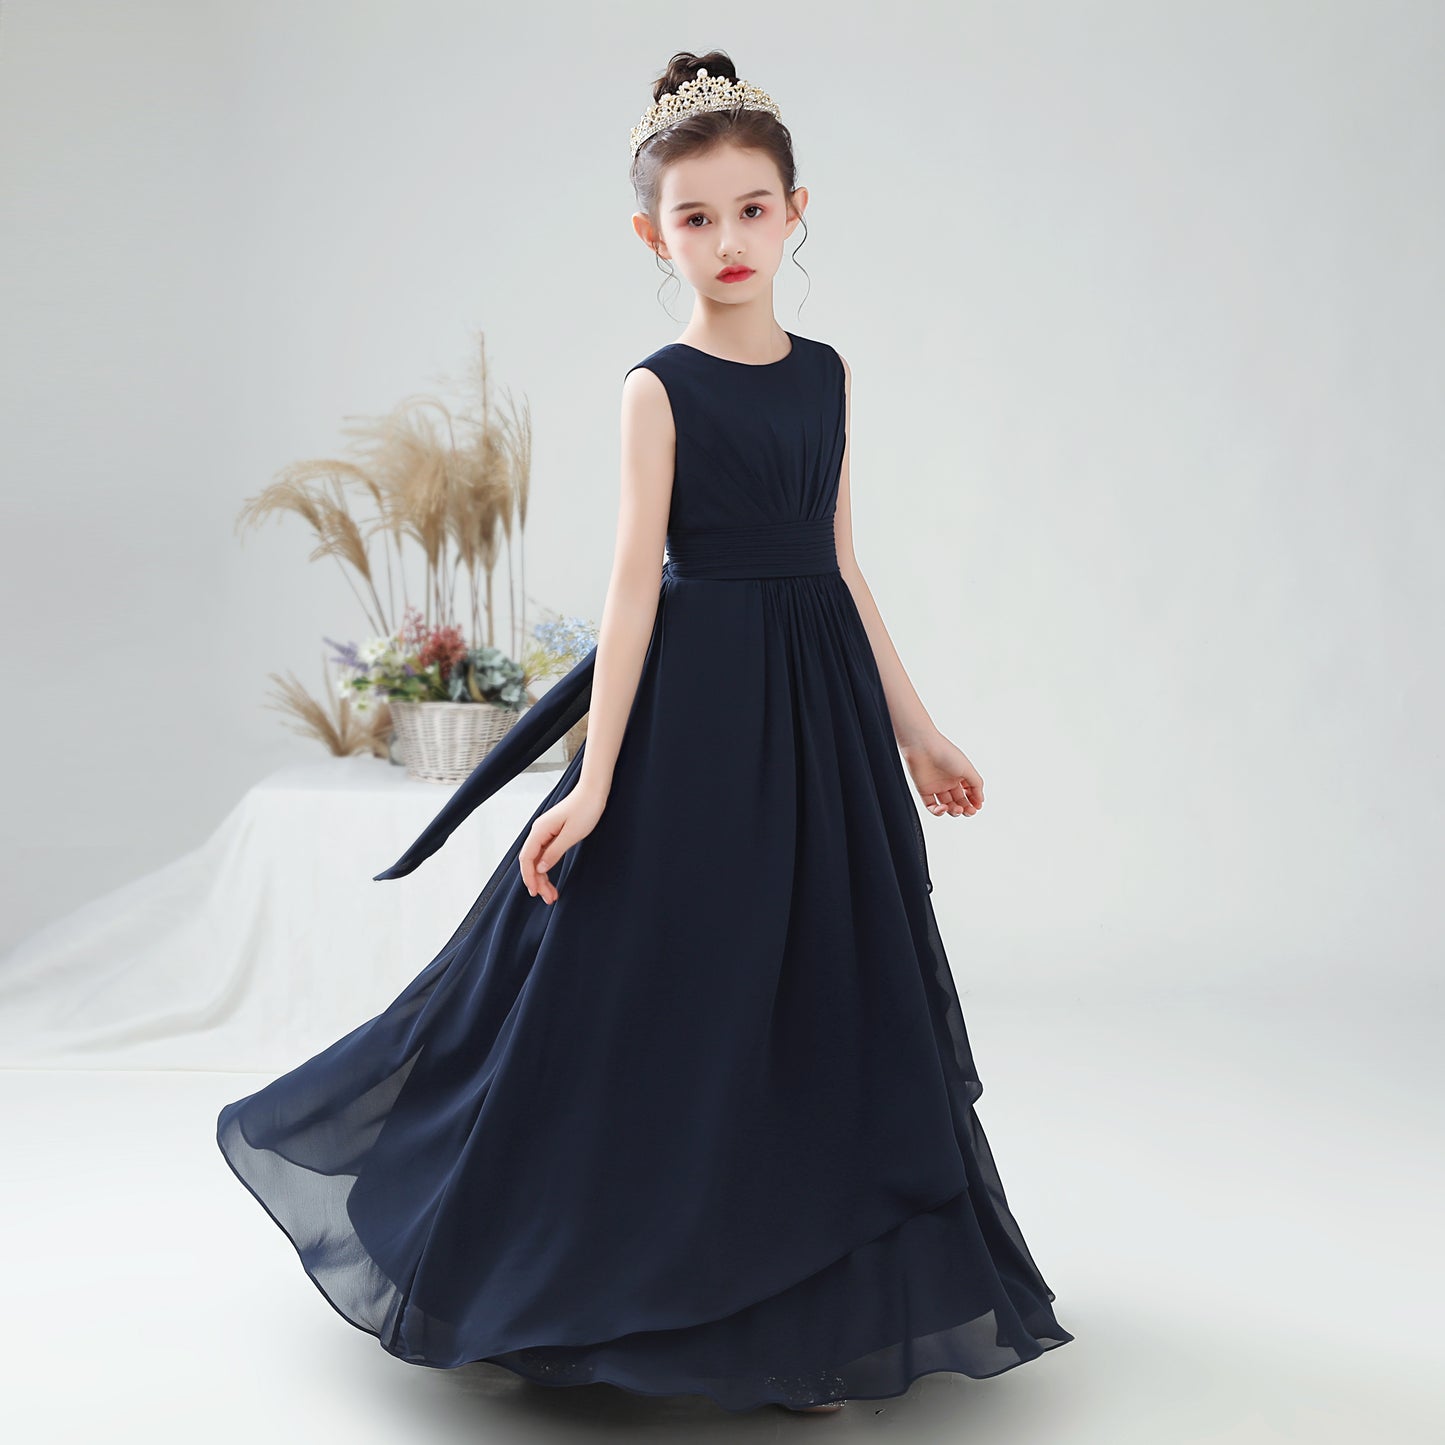 Vestido para Niña Real Pictures Chiffon Flower Girl Dress For Wedding Party First Communion Little Bride Gowns Junior Bridesmaid Color Azul